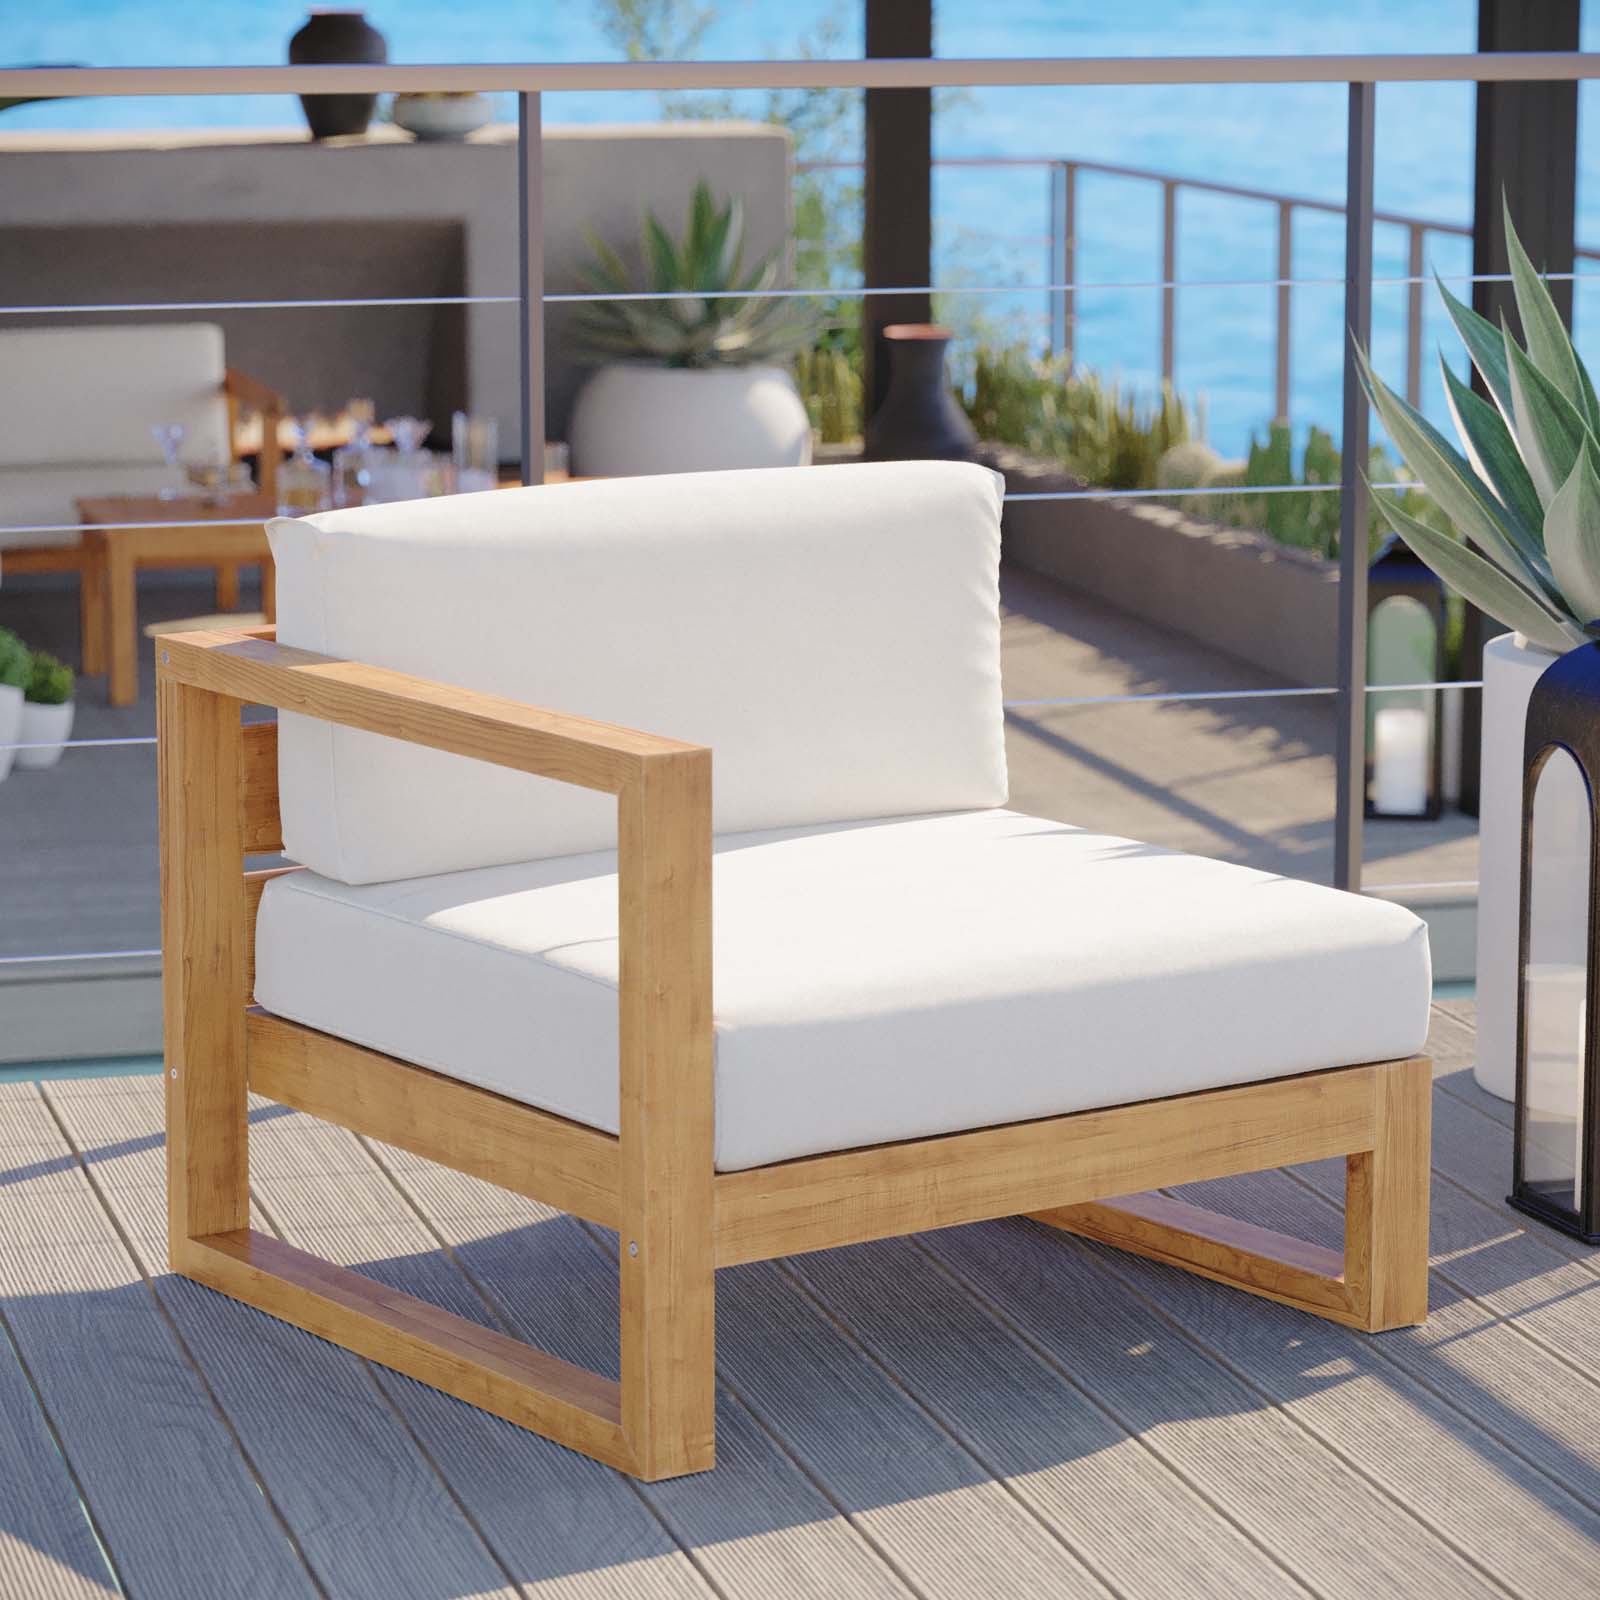 Upland Outdoor Patio Teak Wood Left-Arm Chair - East Shore Modern Home Furnishings